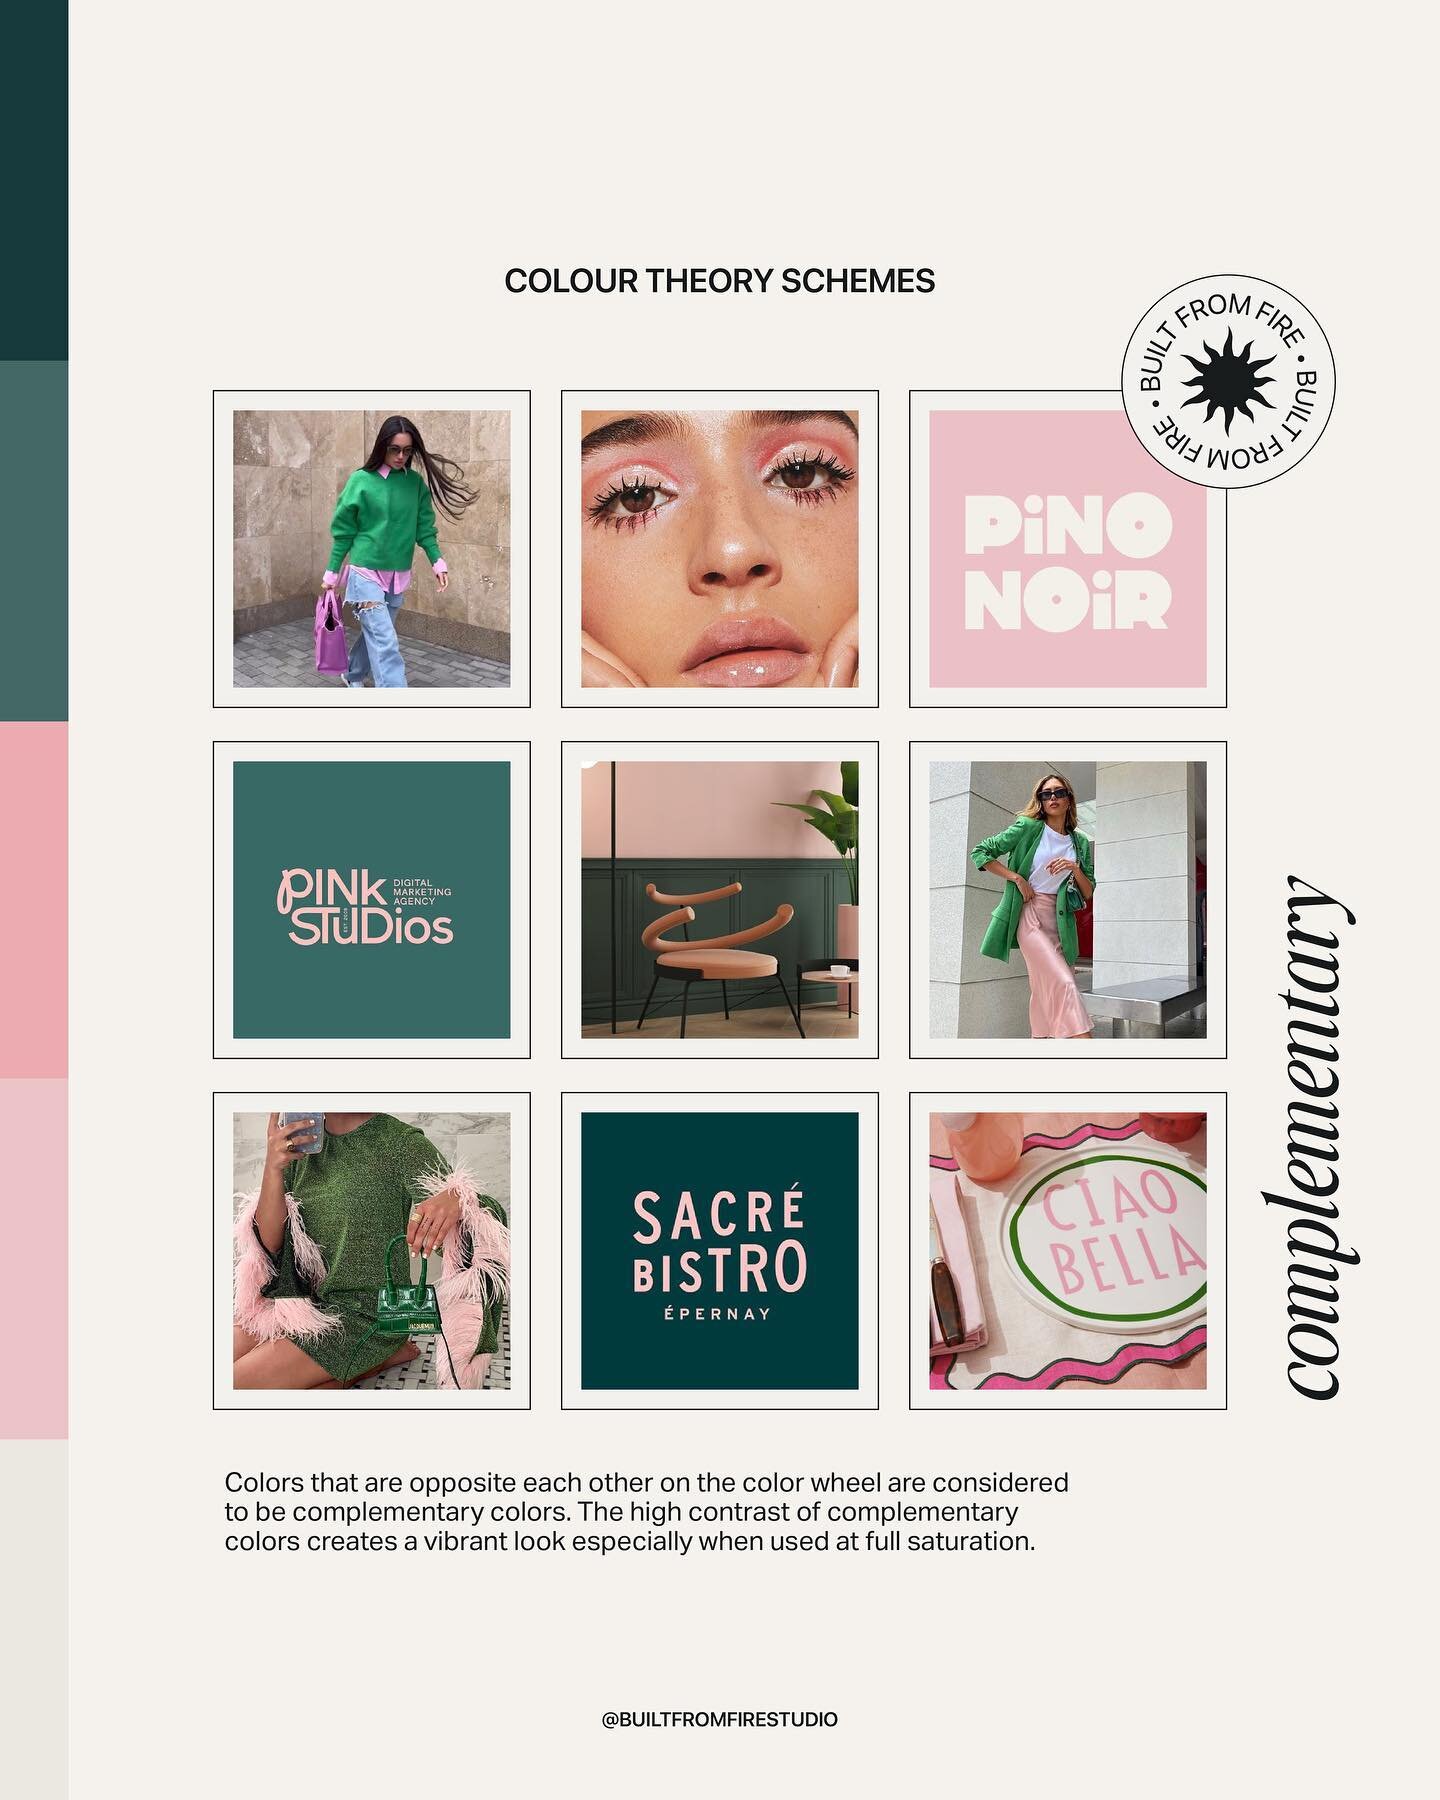 Here at Built From Fire, we say NO to picking colours just because they&rsquo;re super cute or they&rsquo;re your fave colour. The emotions and symbolism portrayed through colour is INTEGRAL to the story your brand tells. This is why our choices are 